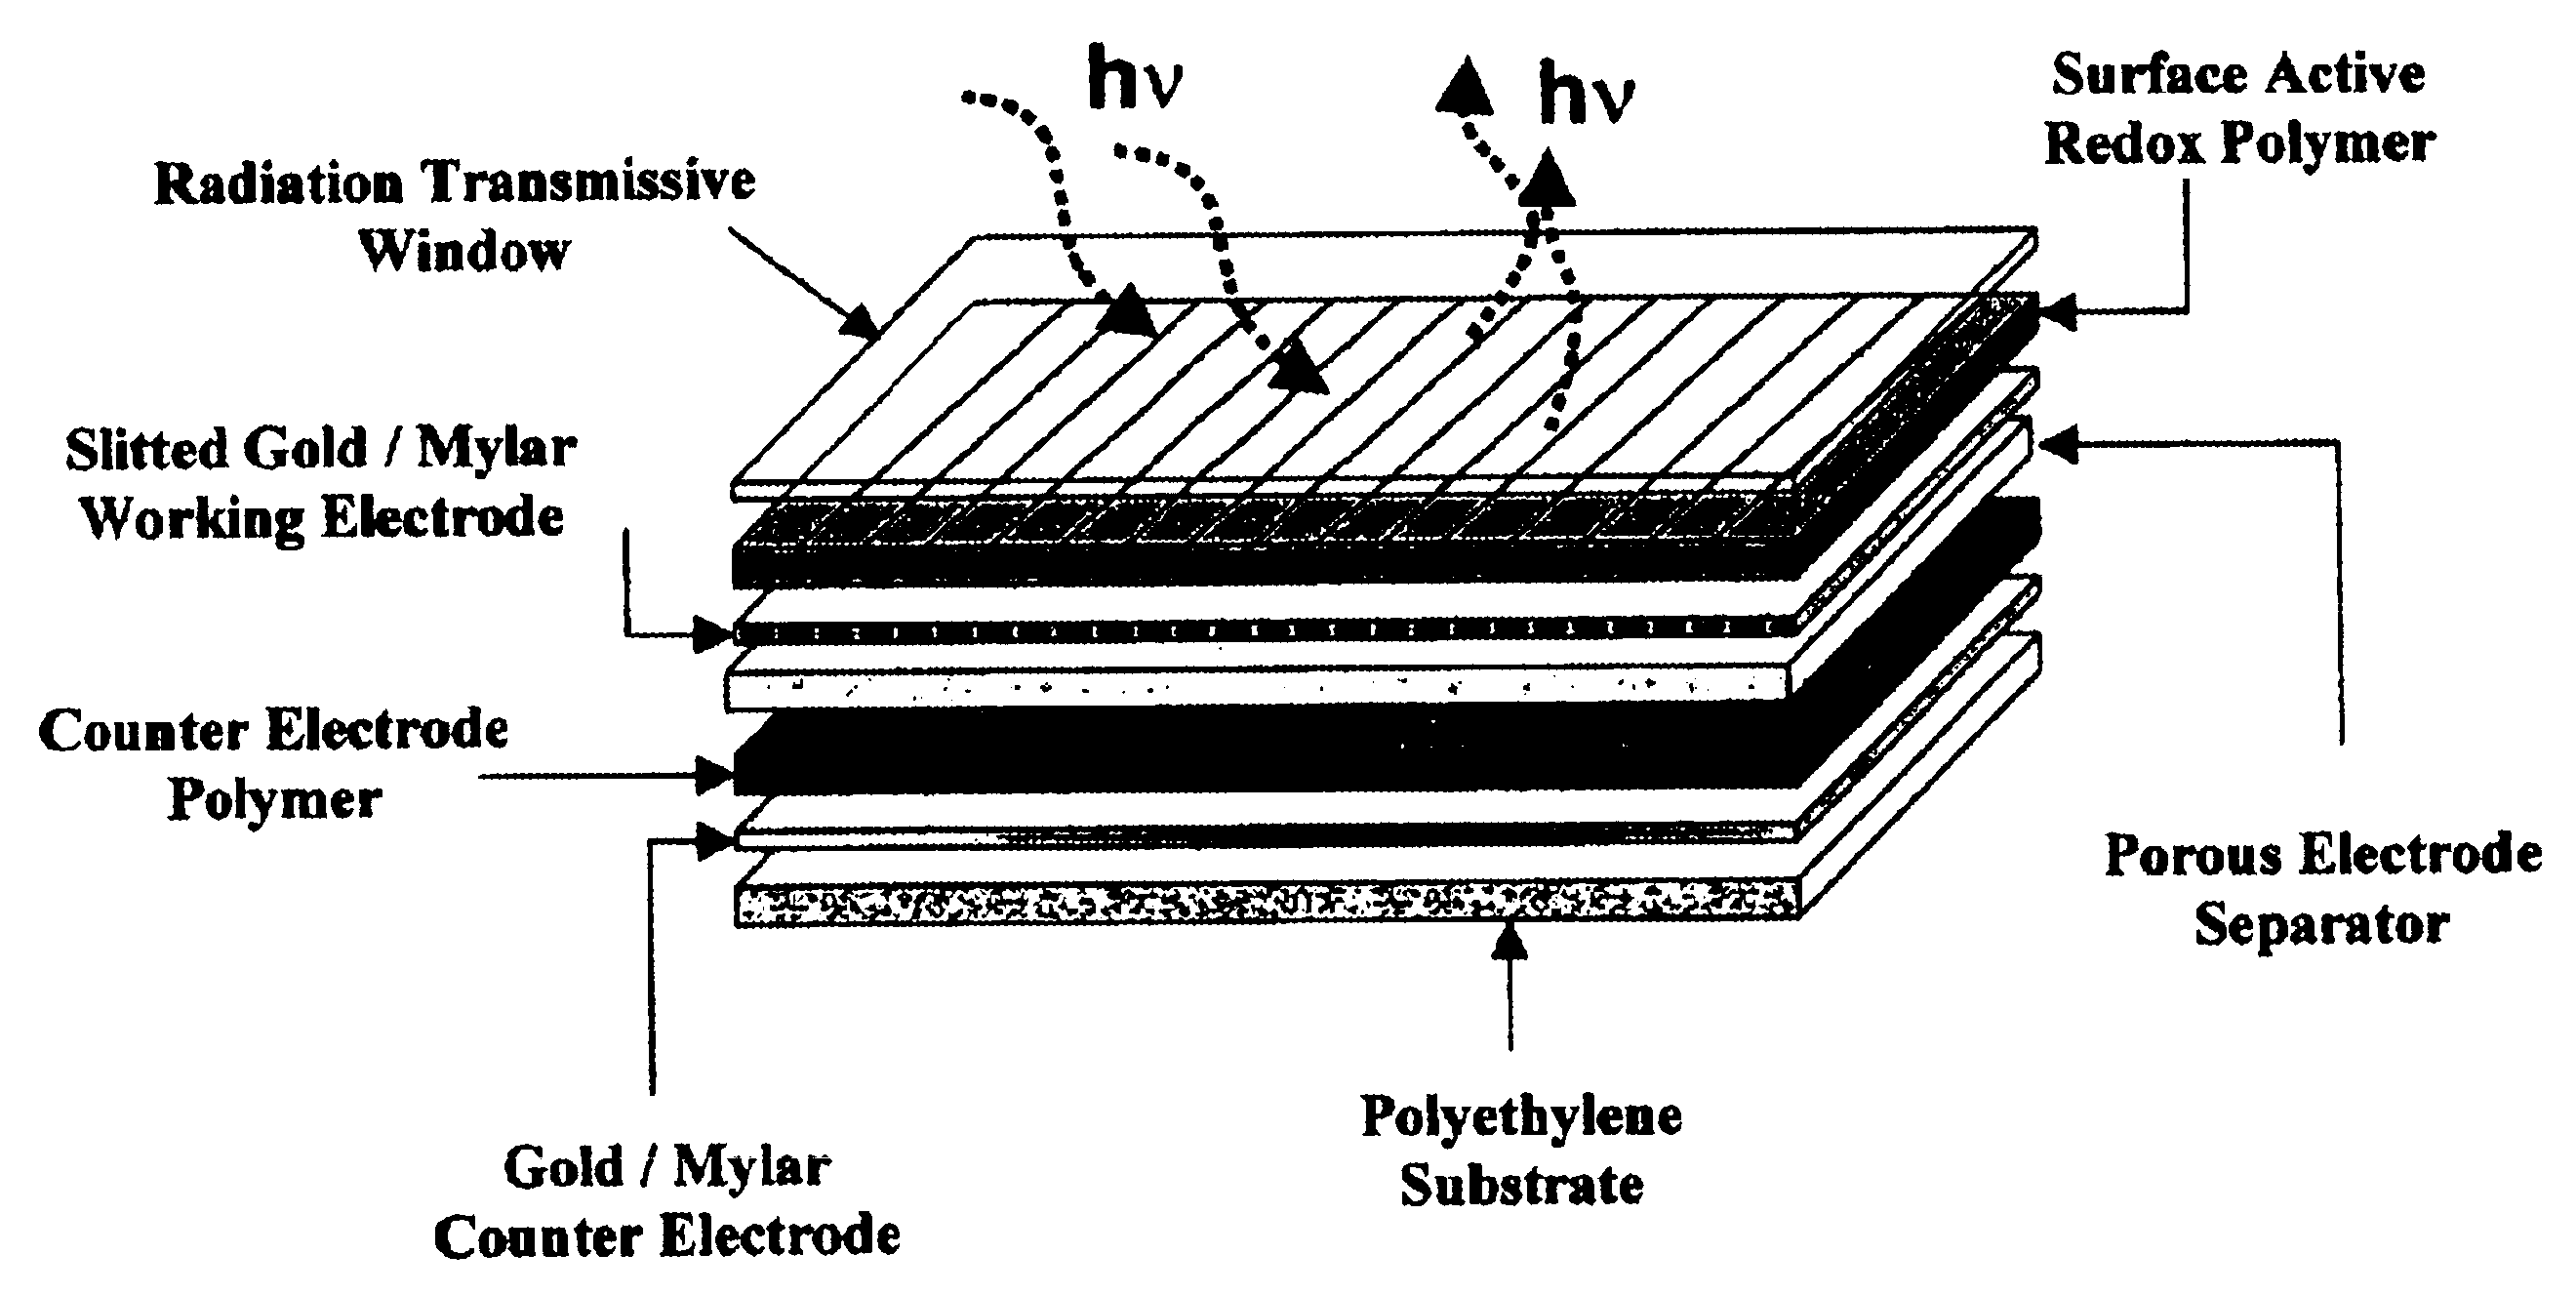 Electrochromic polymers and polymer electrochromic devices